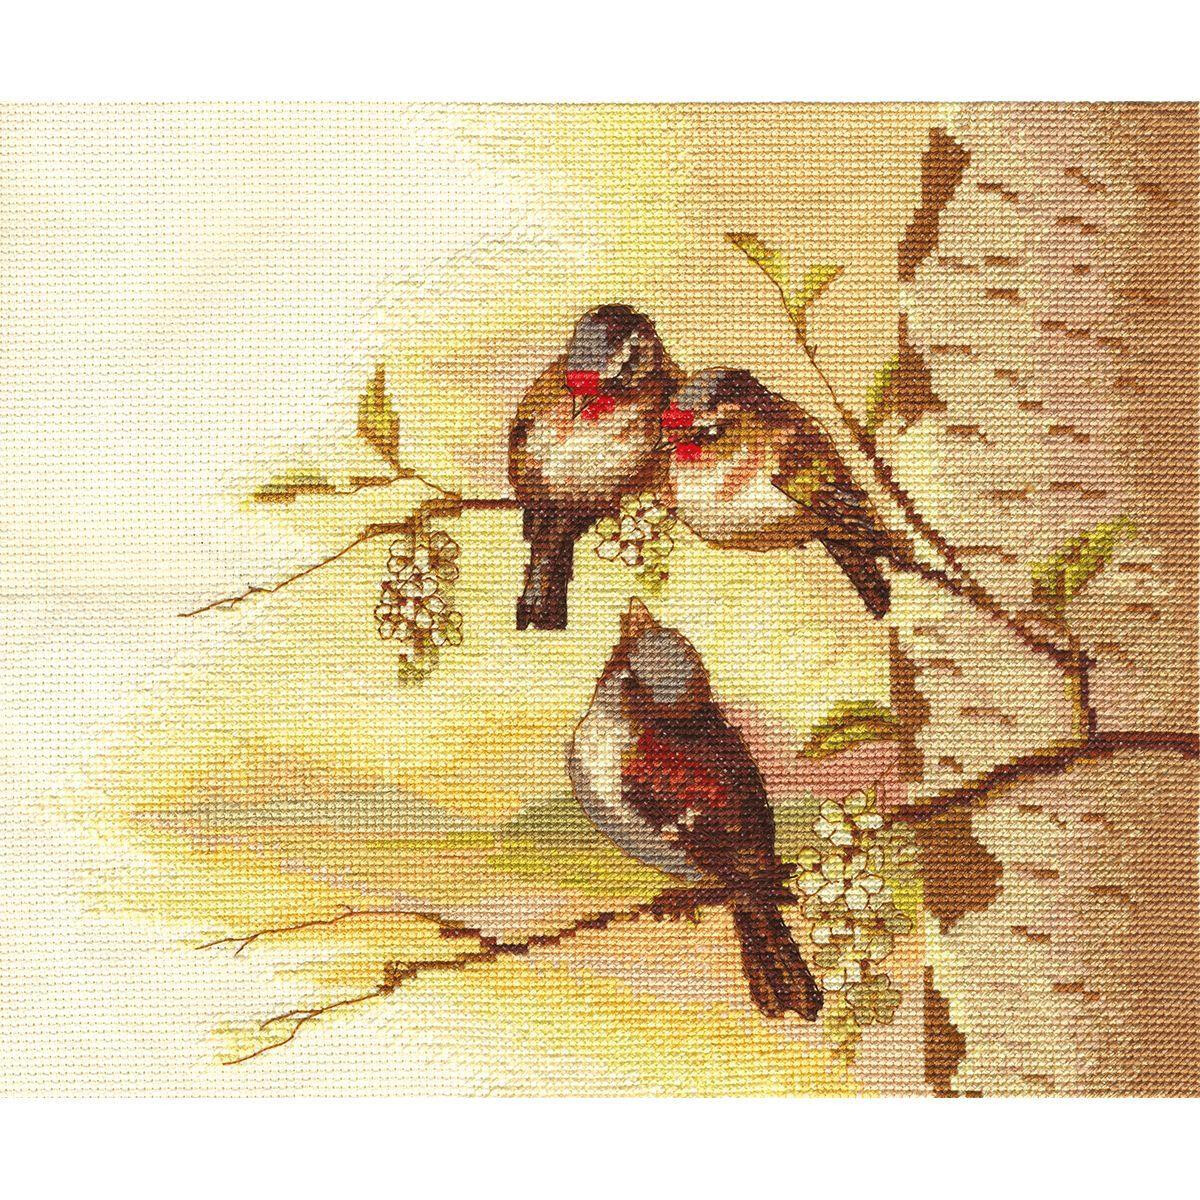 Panna counted cross stitch kit "Spring Tune"...